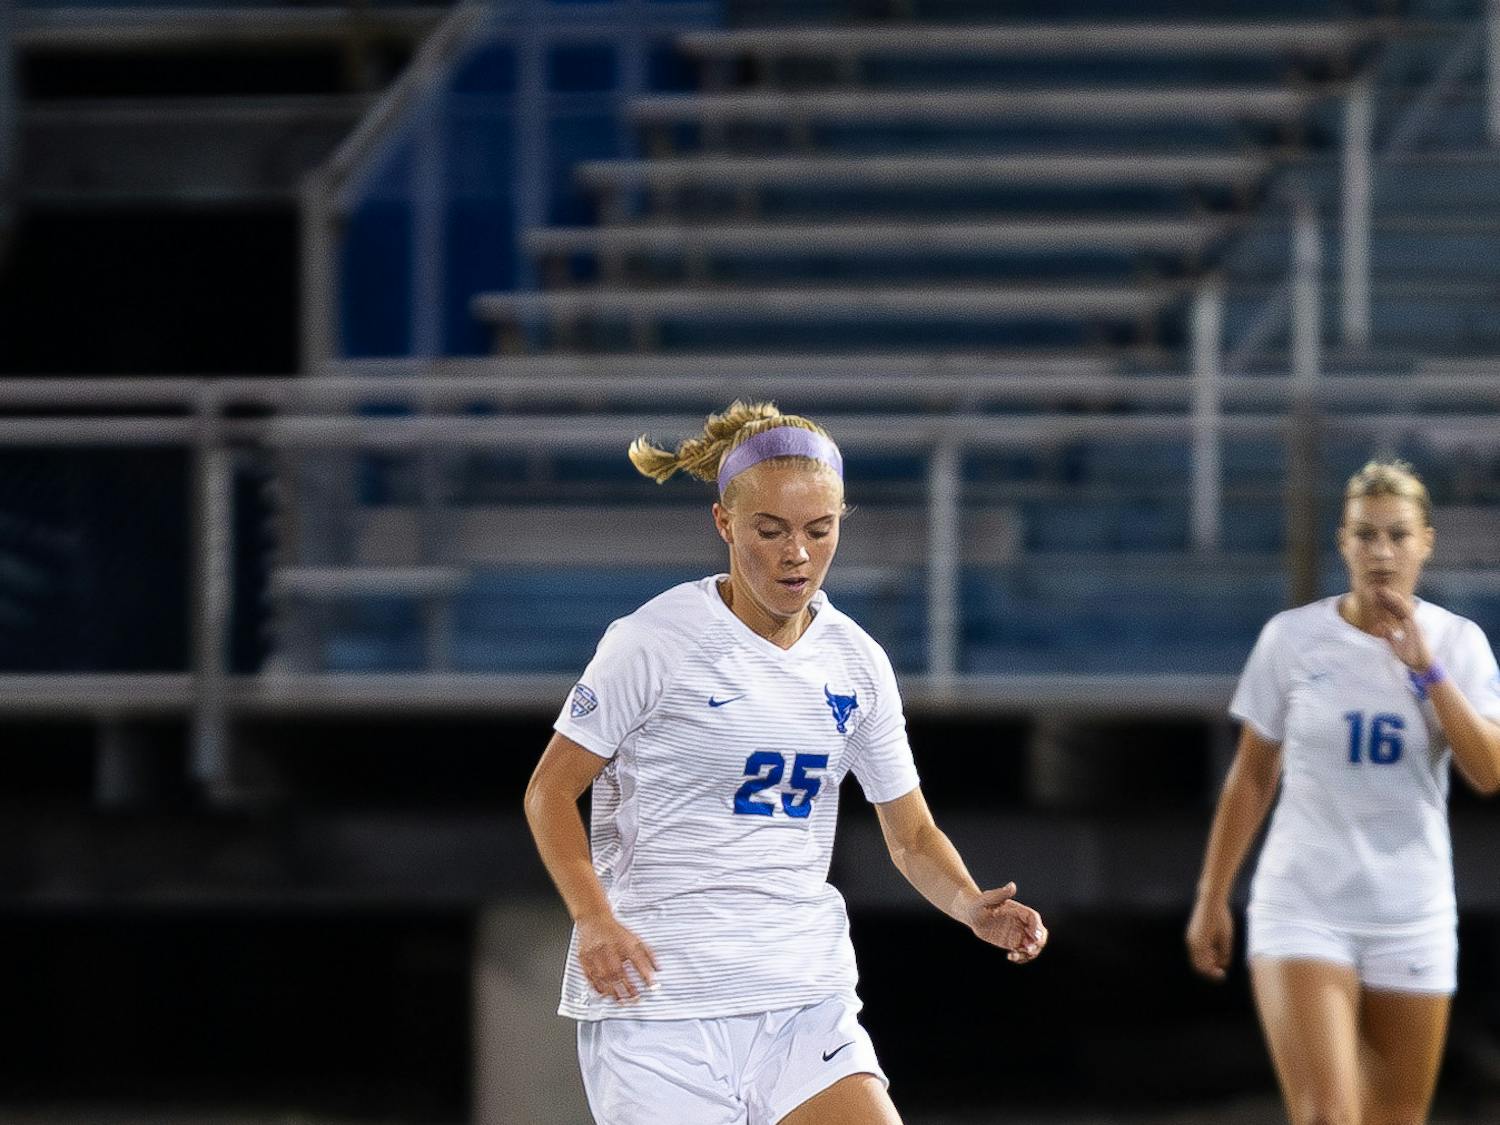 UB women's soccer continued its spring season with an outdoor game Sunday.